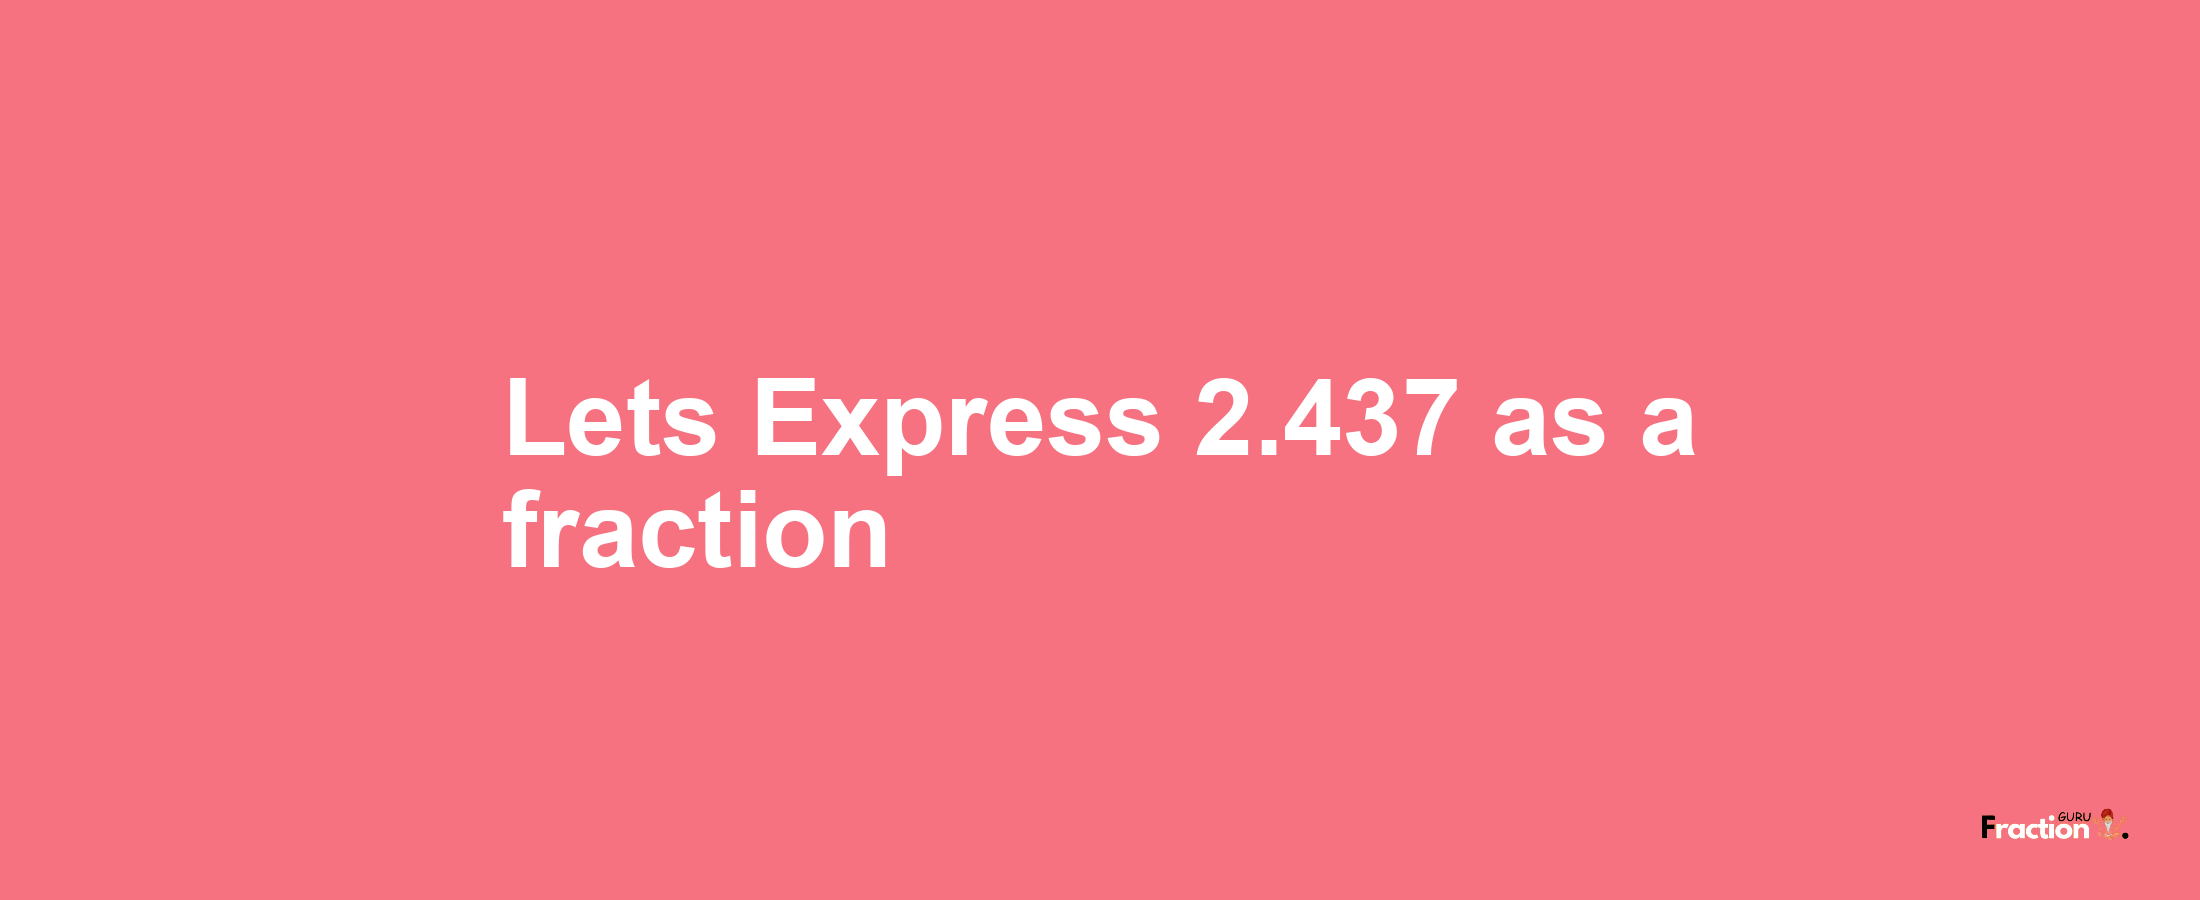 Lets Express 2.437 as afraction